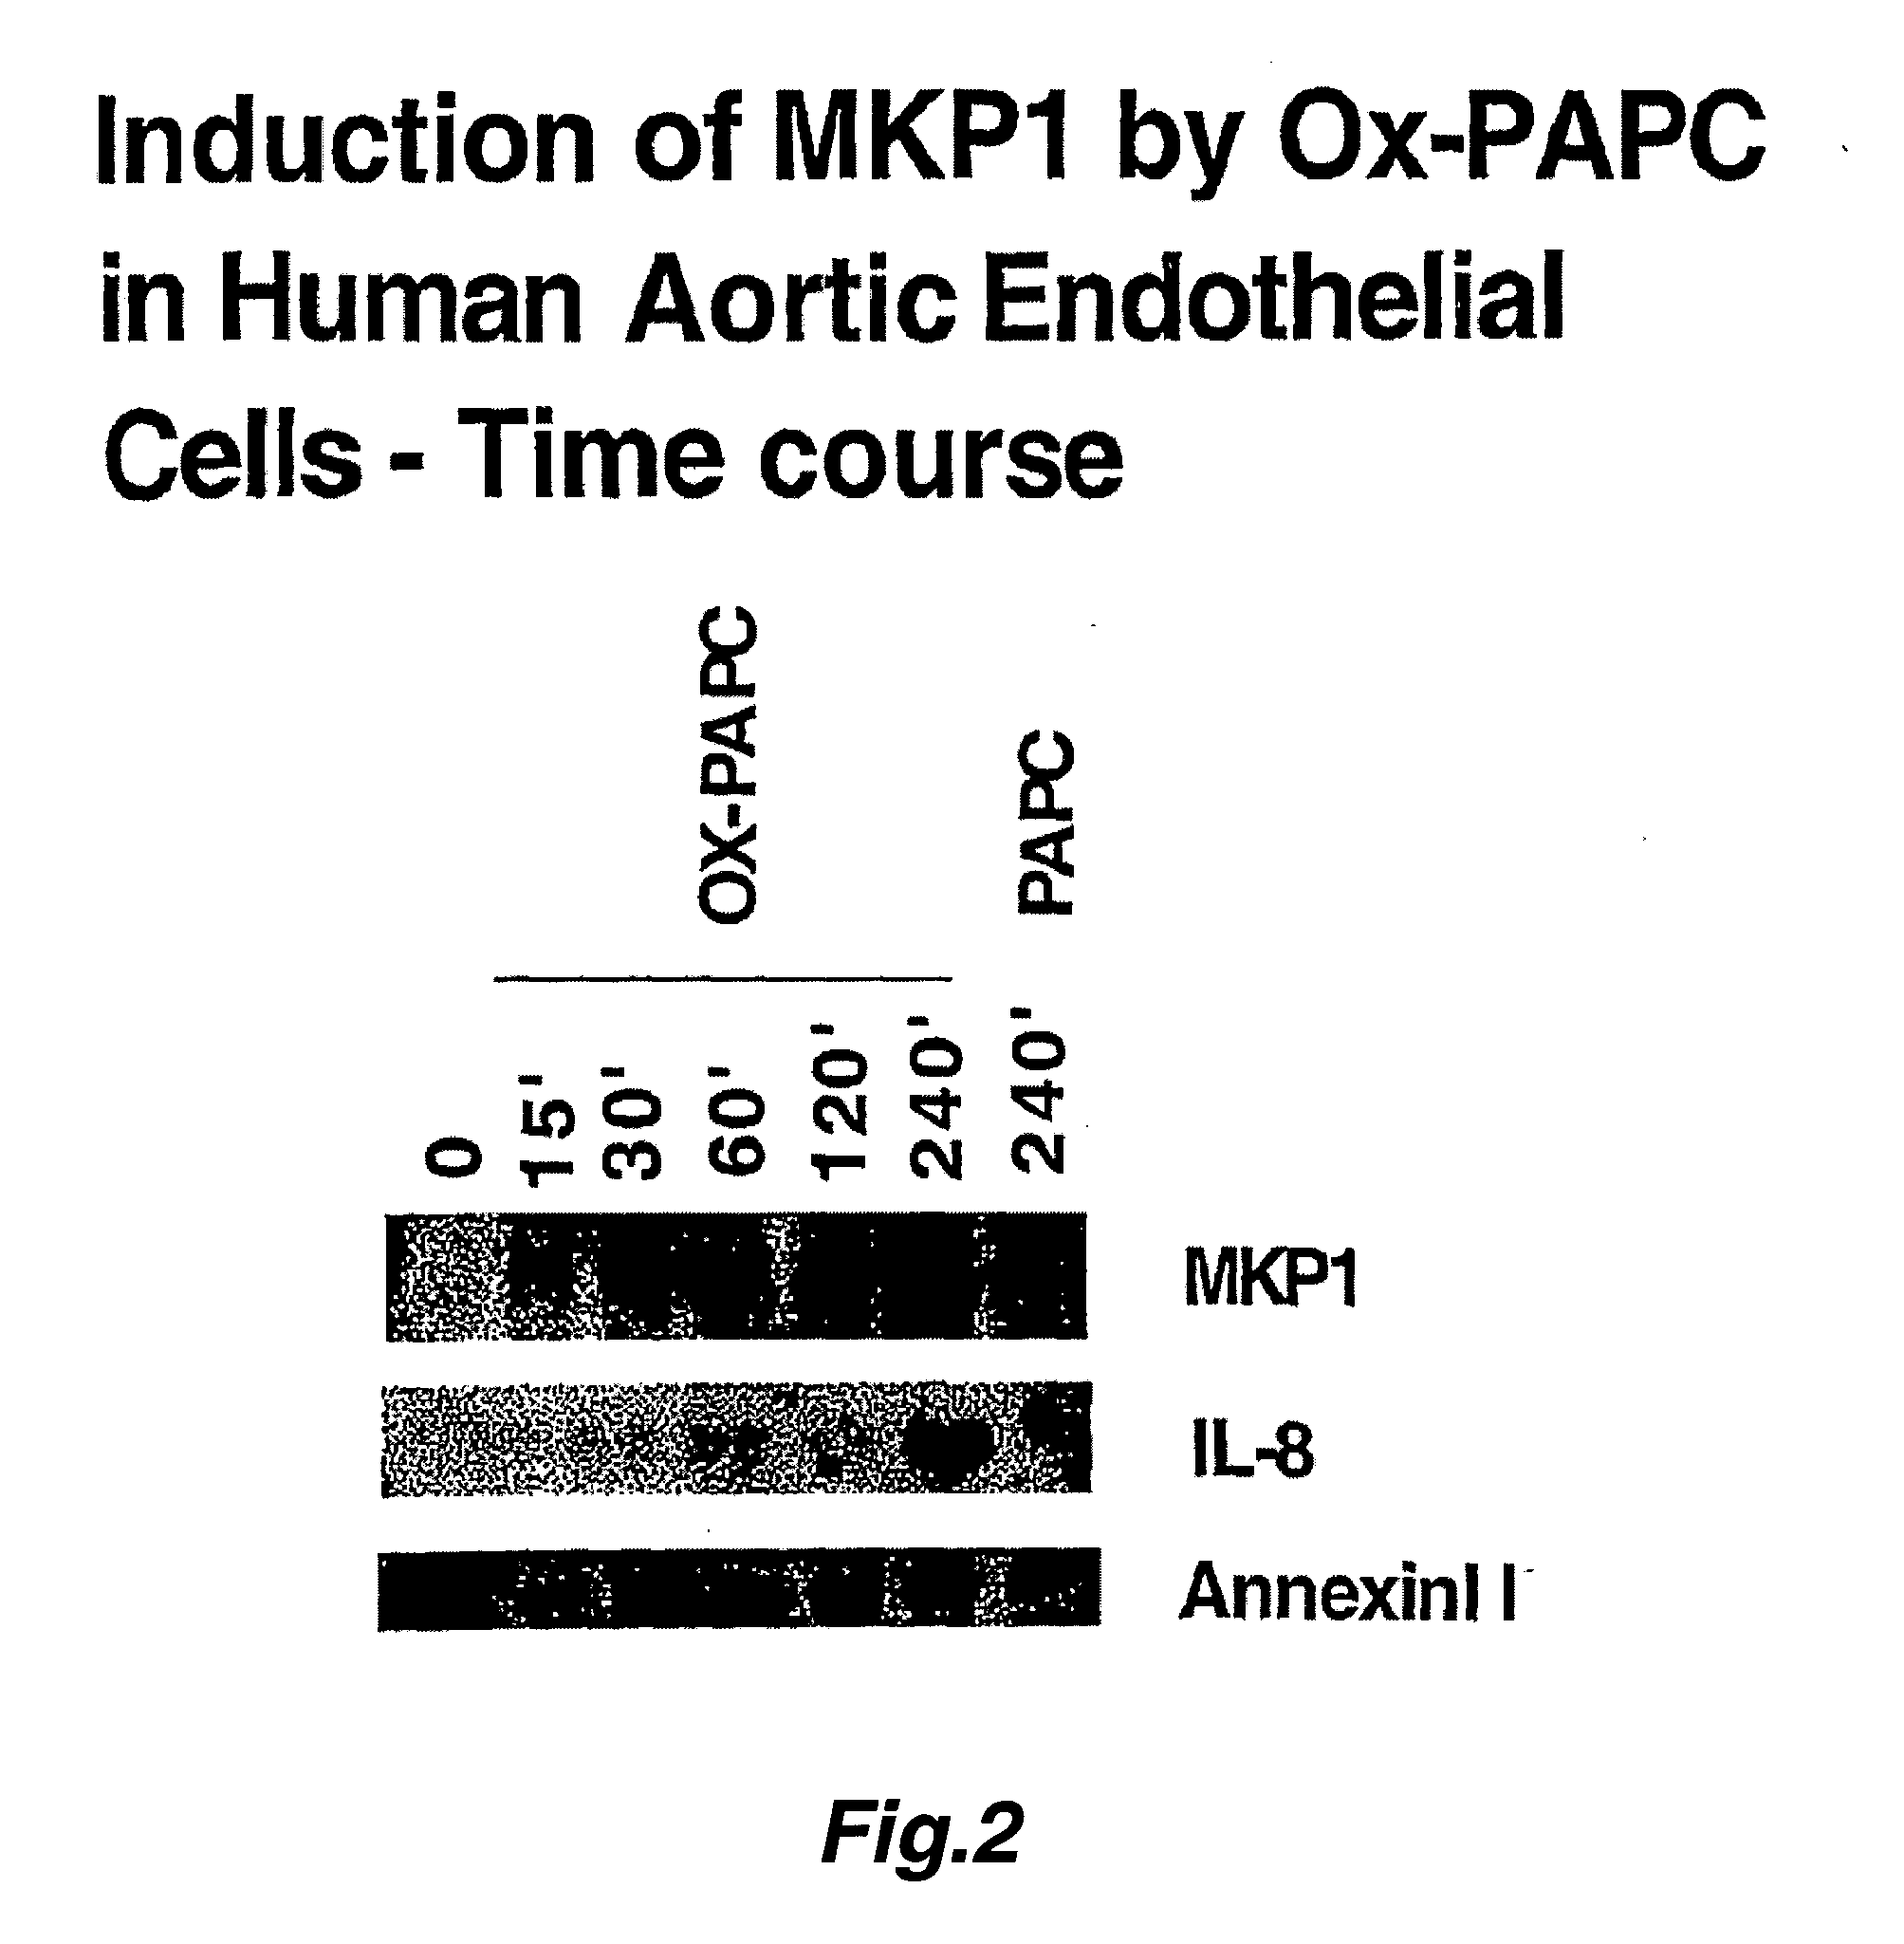 Control of gene induced by oxidated lipids in human artery wall cells